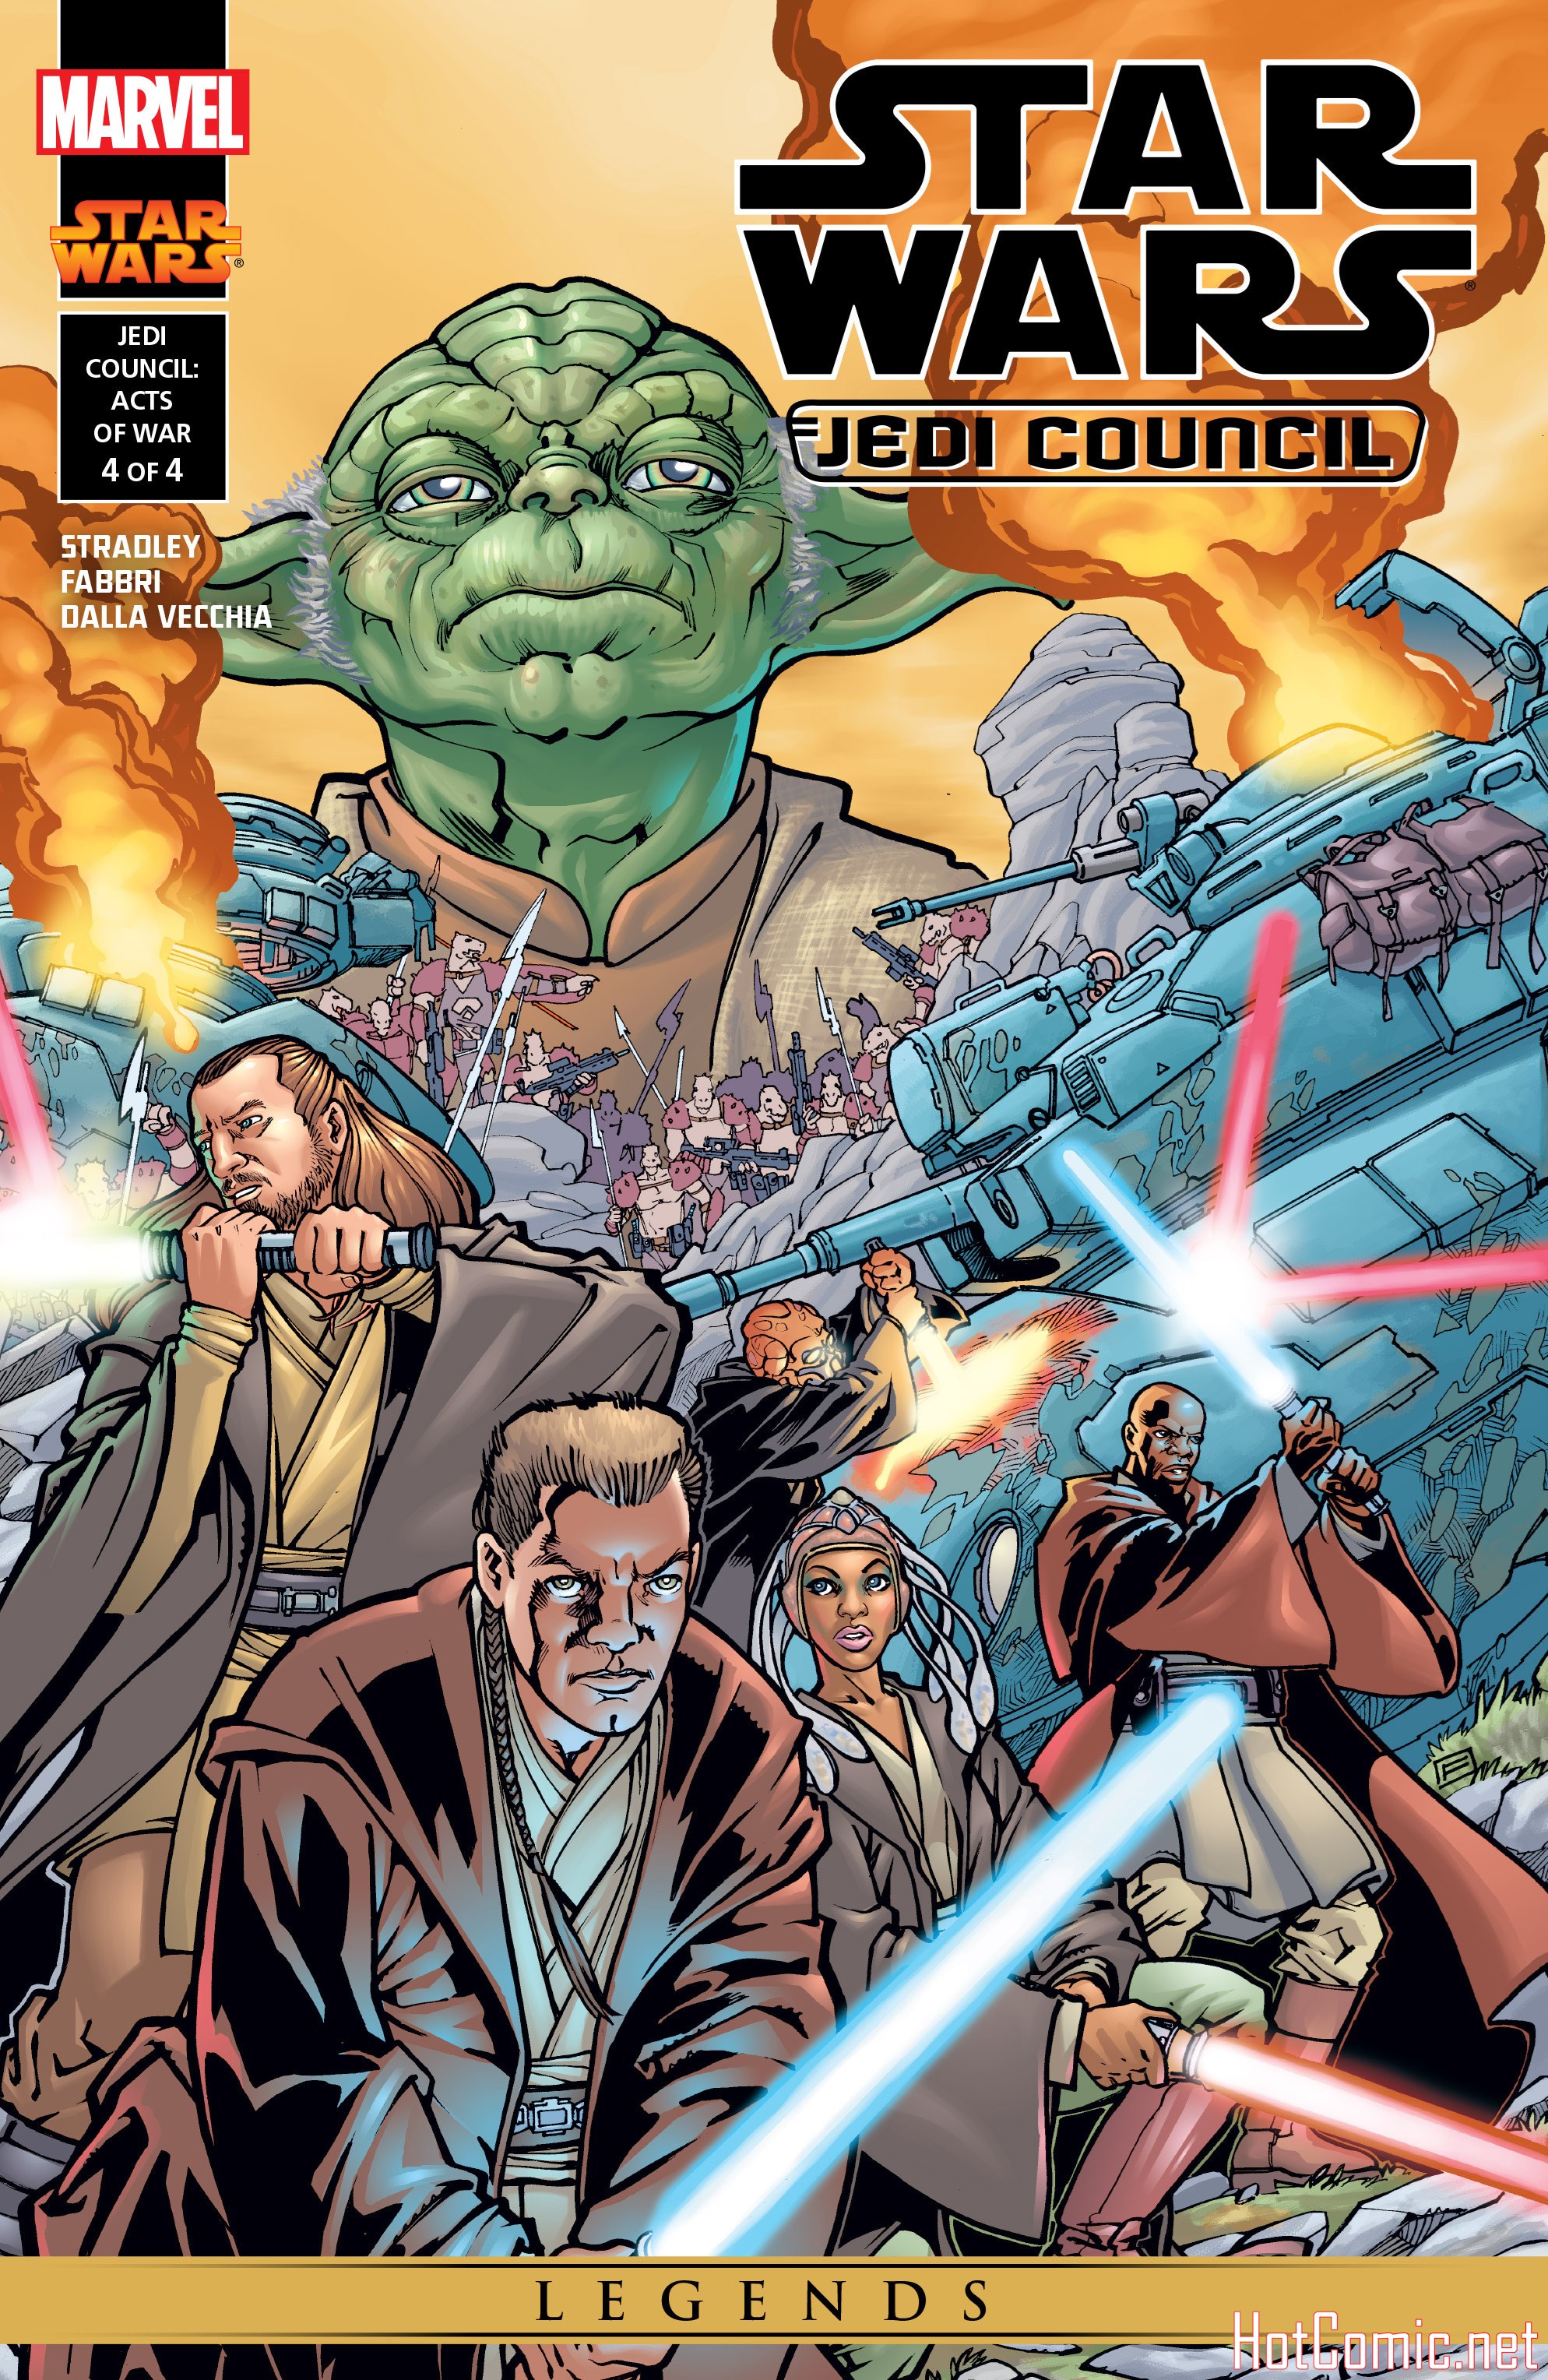 Star Wars: Jedi Council: Acts of War